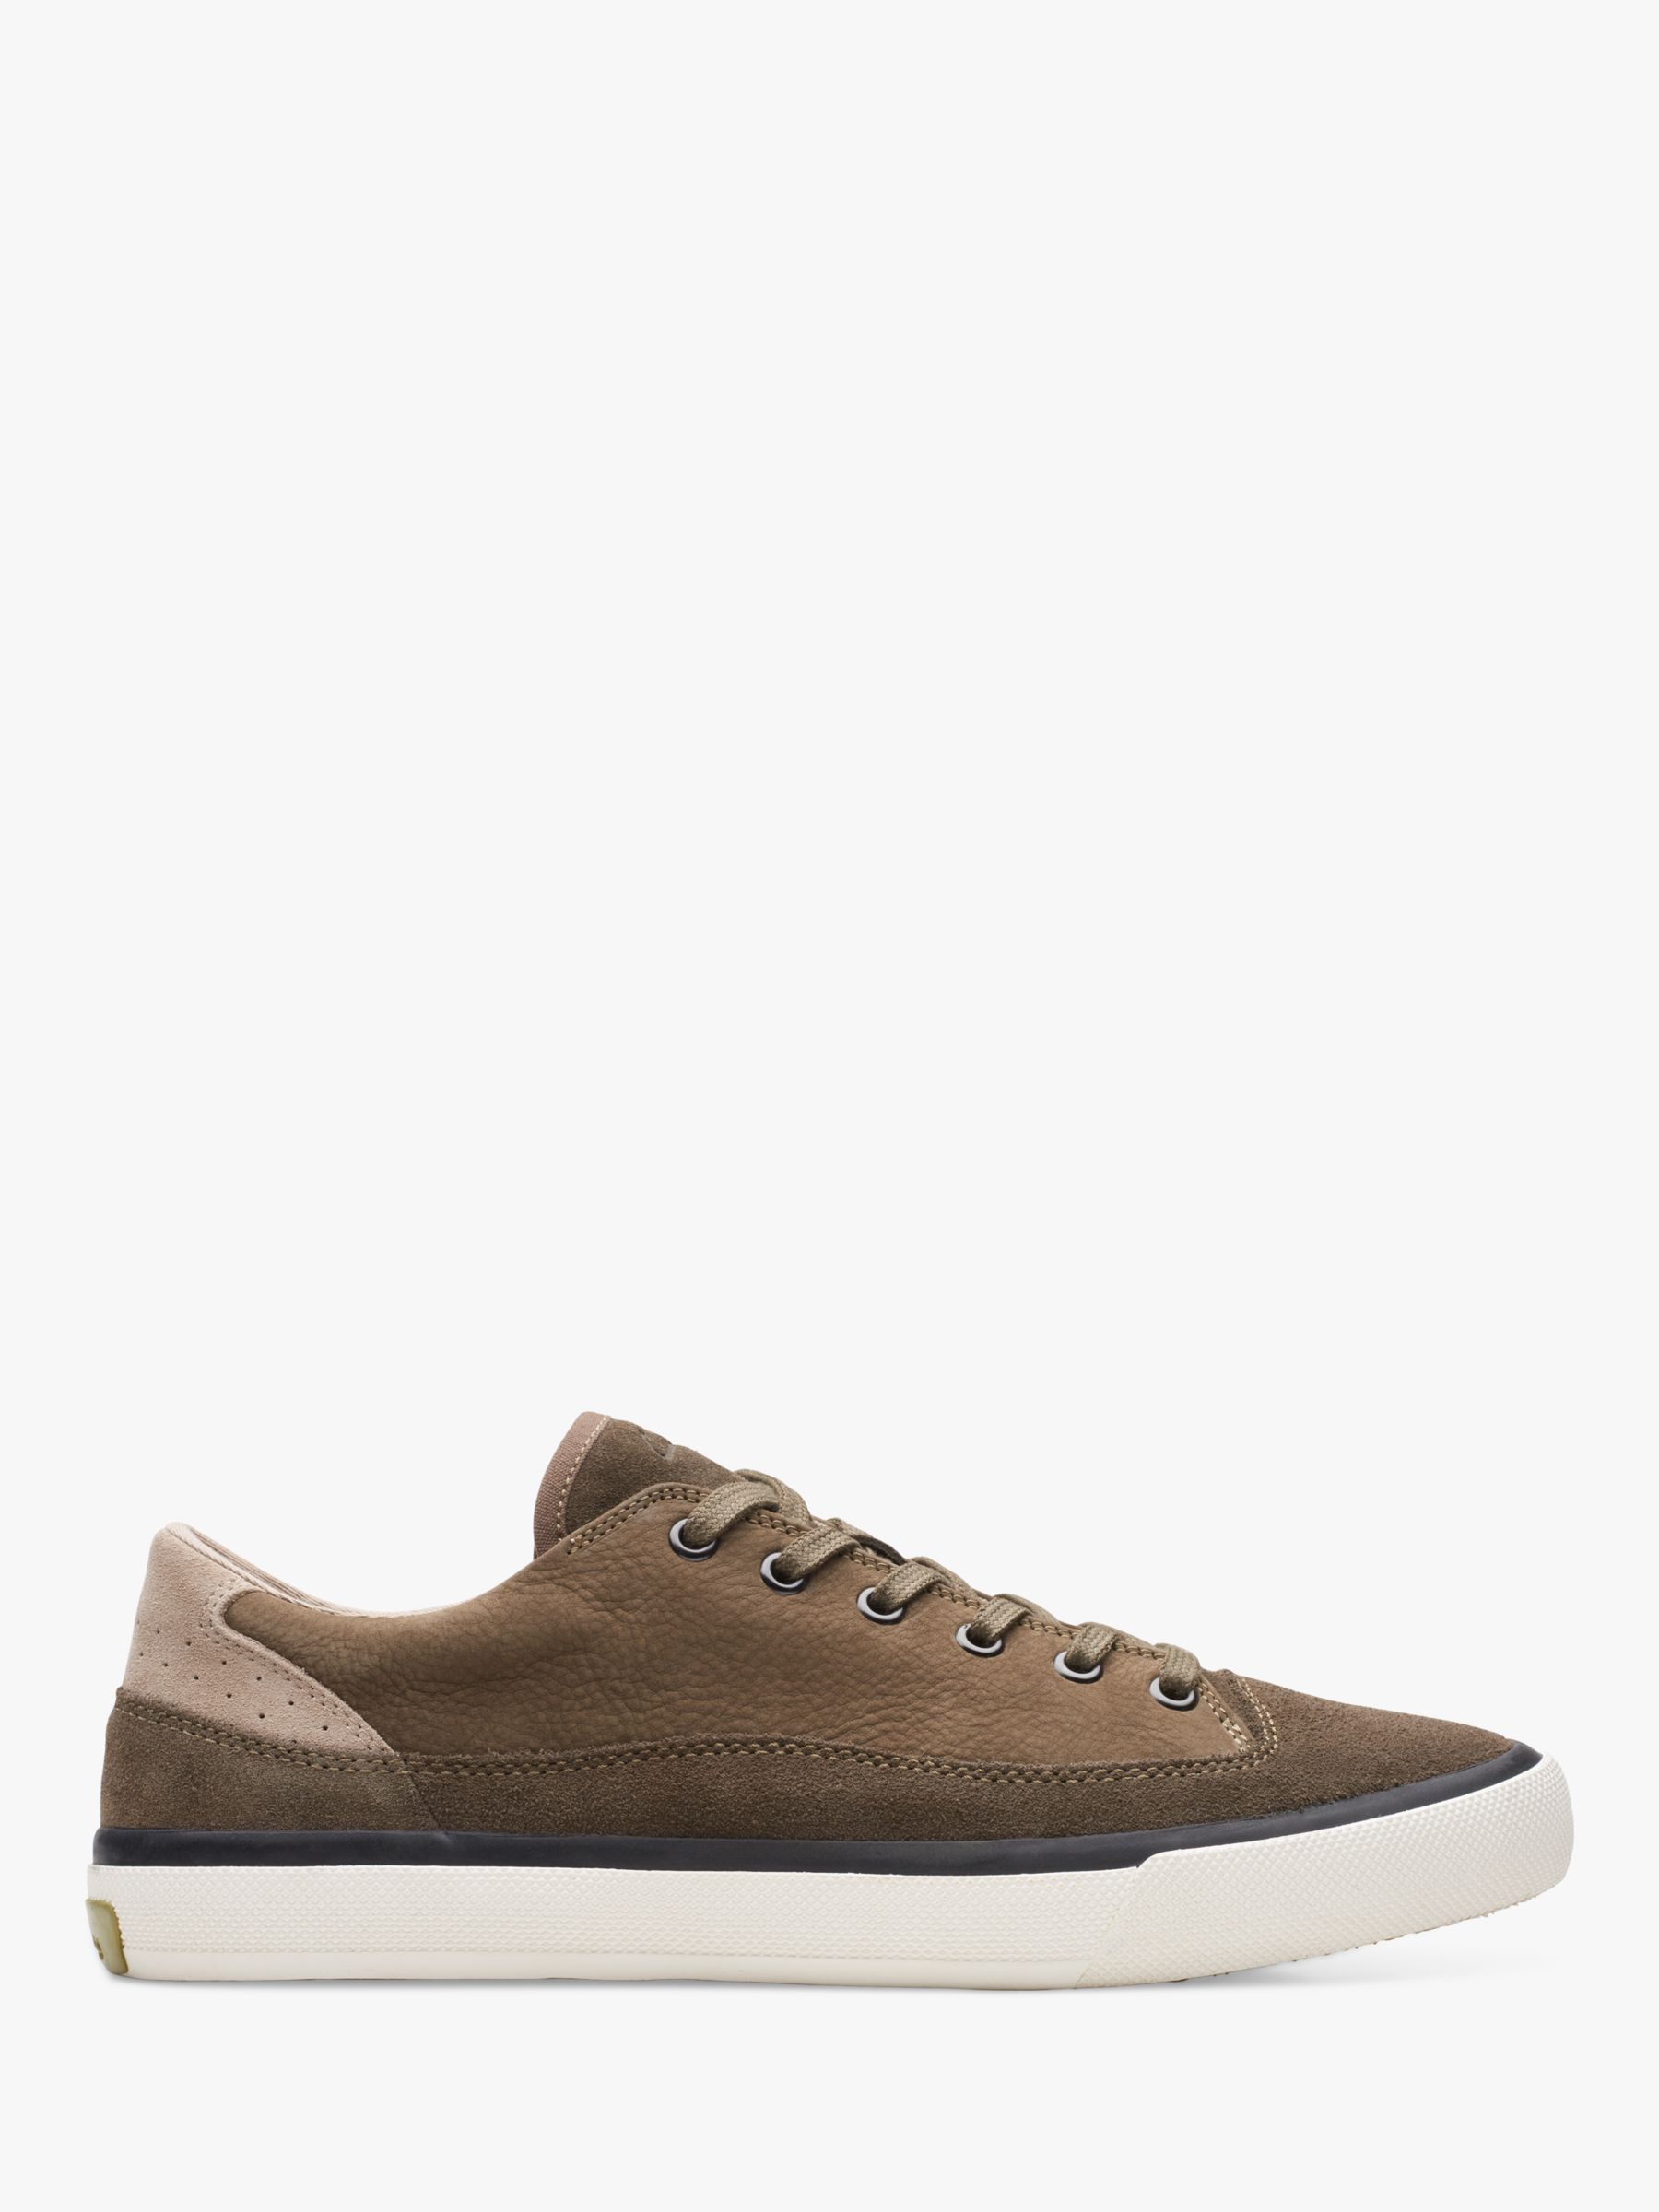 Clarks Aceley Lo Leather Trainers, Dark Olive Combi at John Lewis ...